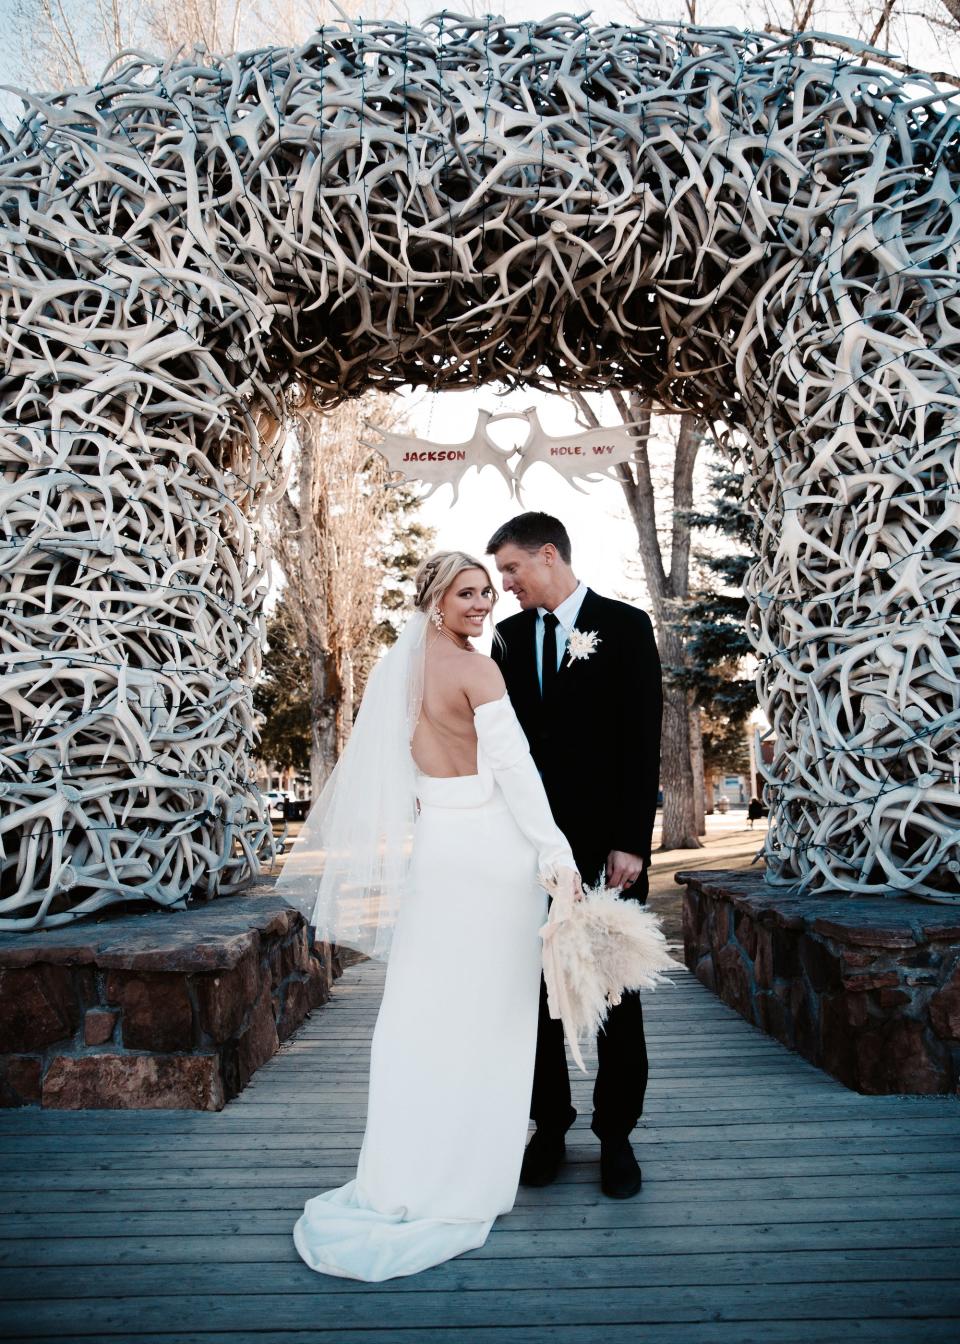 A bride looks over her shoulder in front of an archway as her groom looks at her.